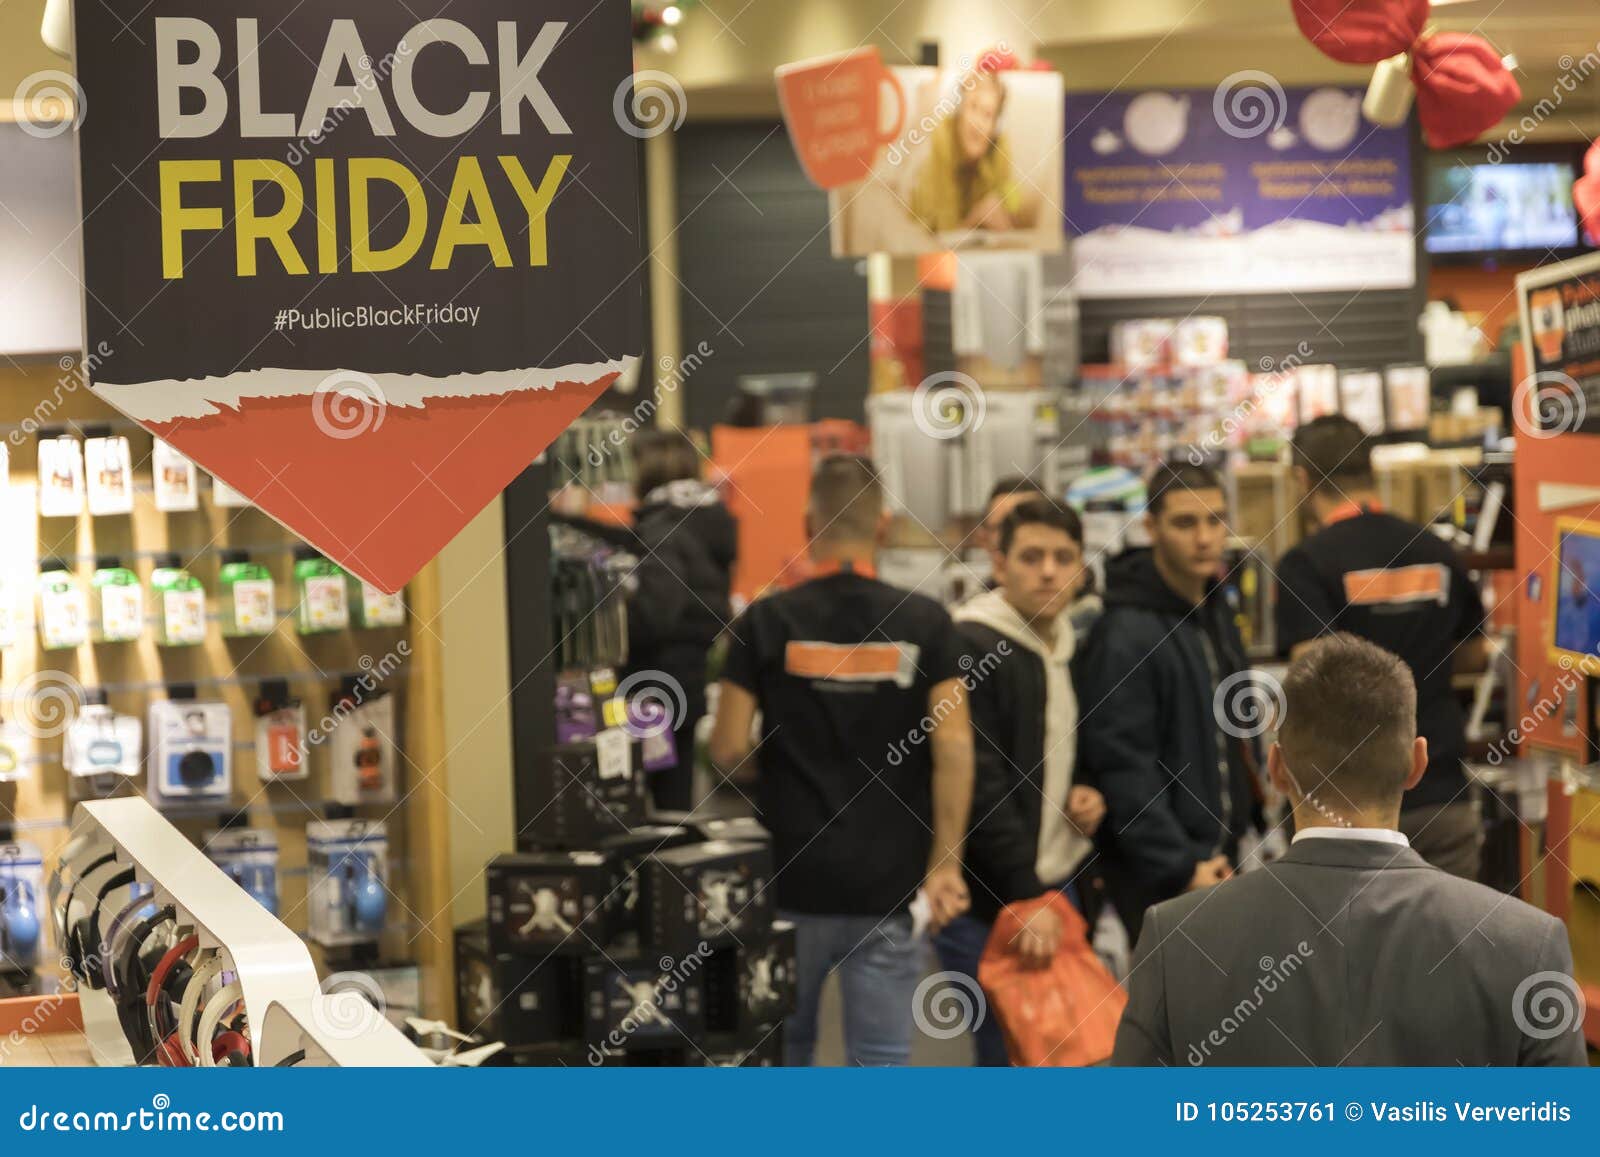 People Shop Inside a Department Store during Black Friday Shopping - What Shops Are Doing Black Friday Deals